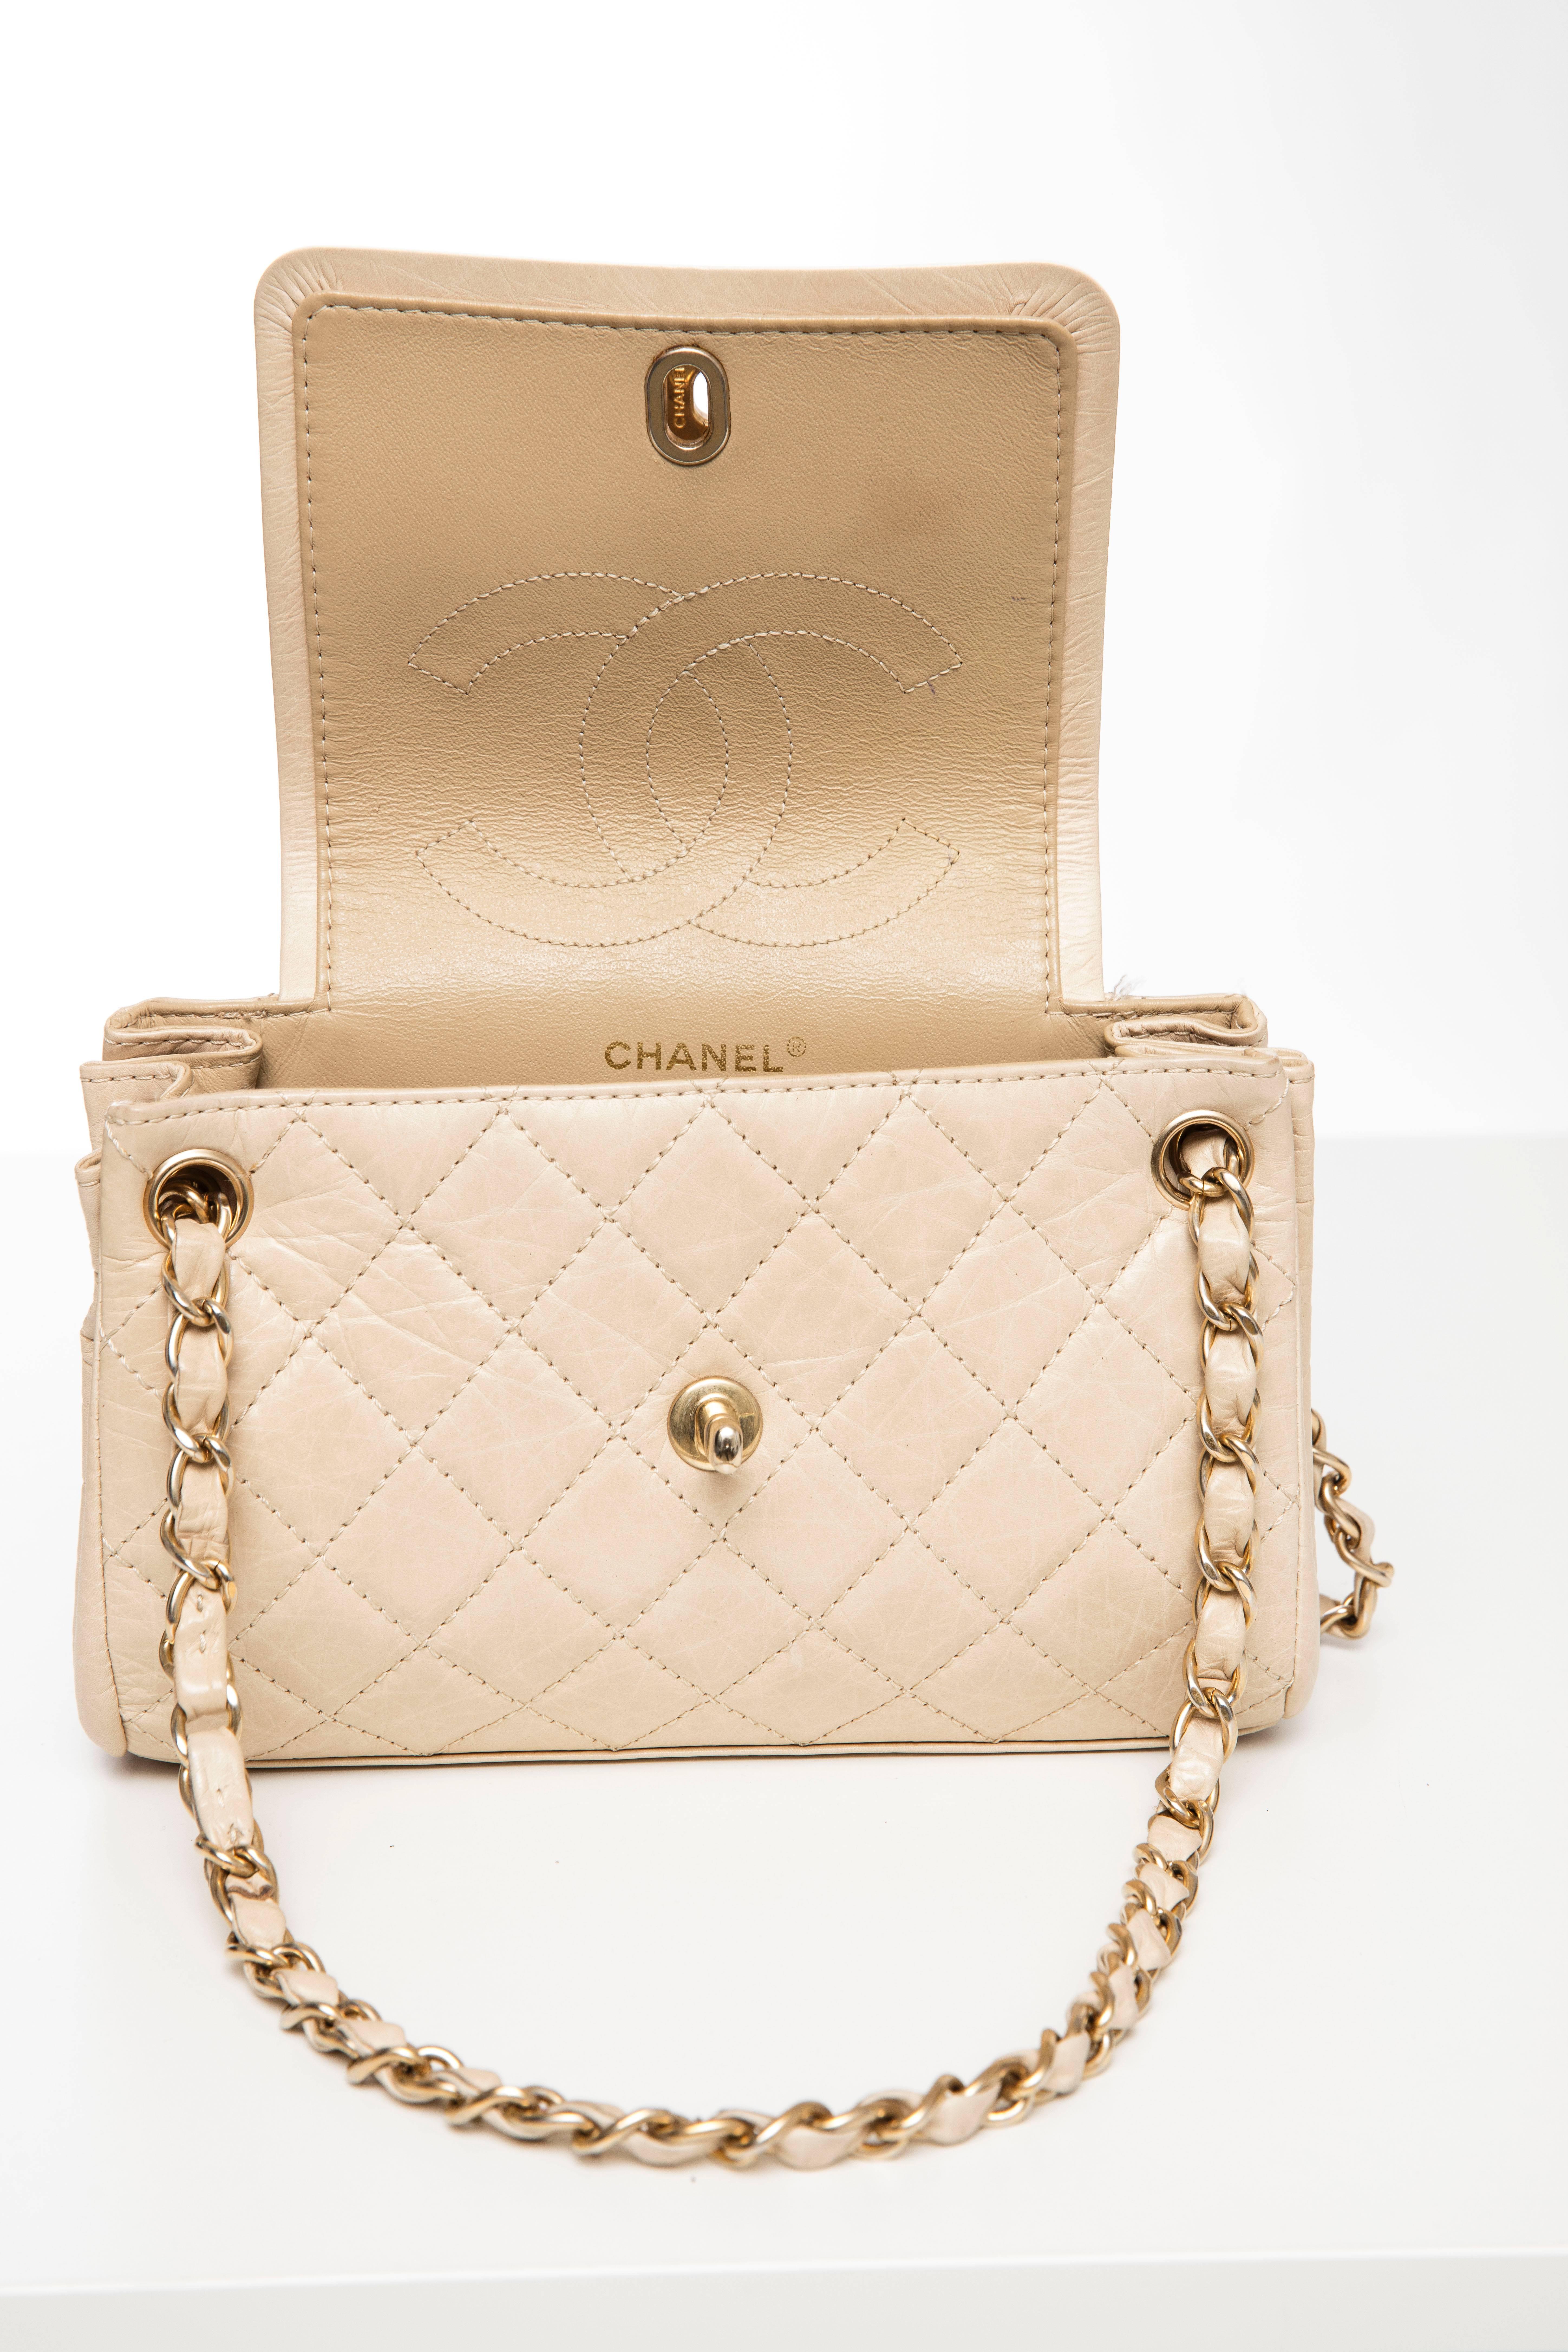 Women's Chanel Beige Quilted Leather Sac Class Rabat Bag